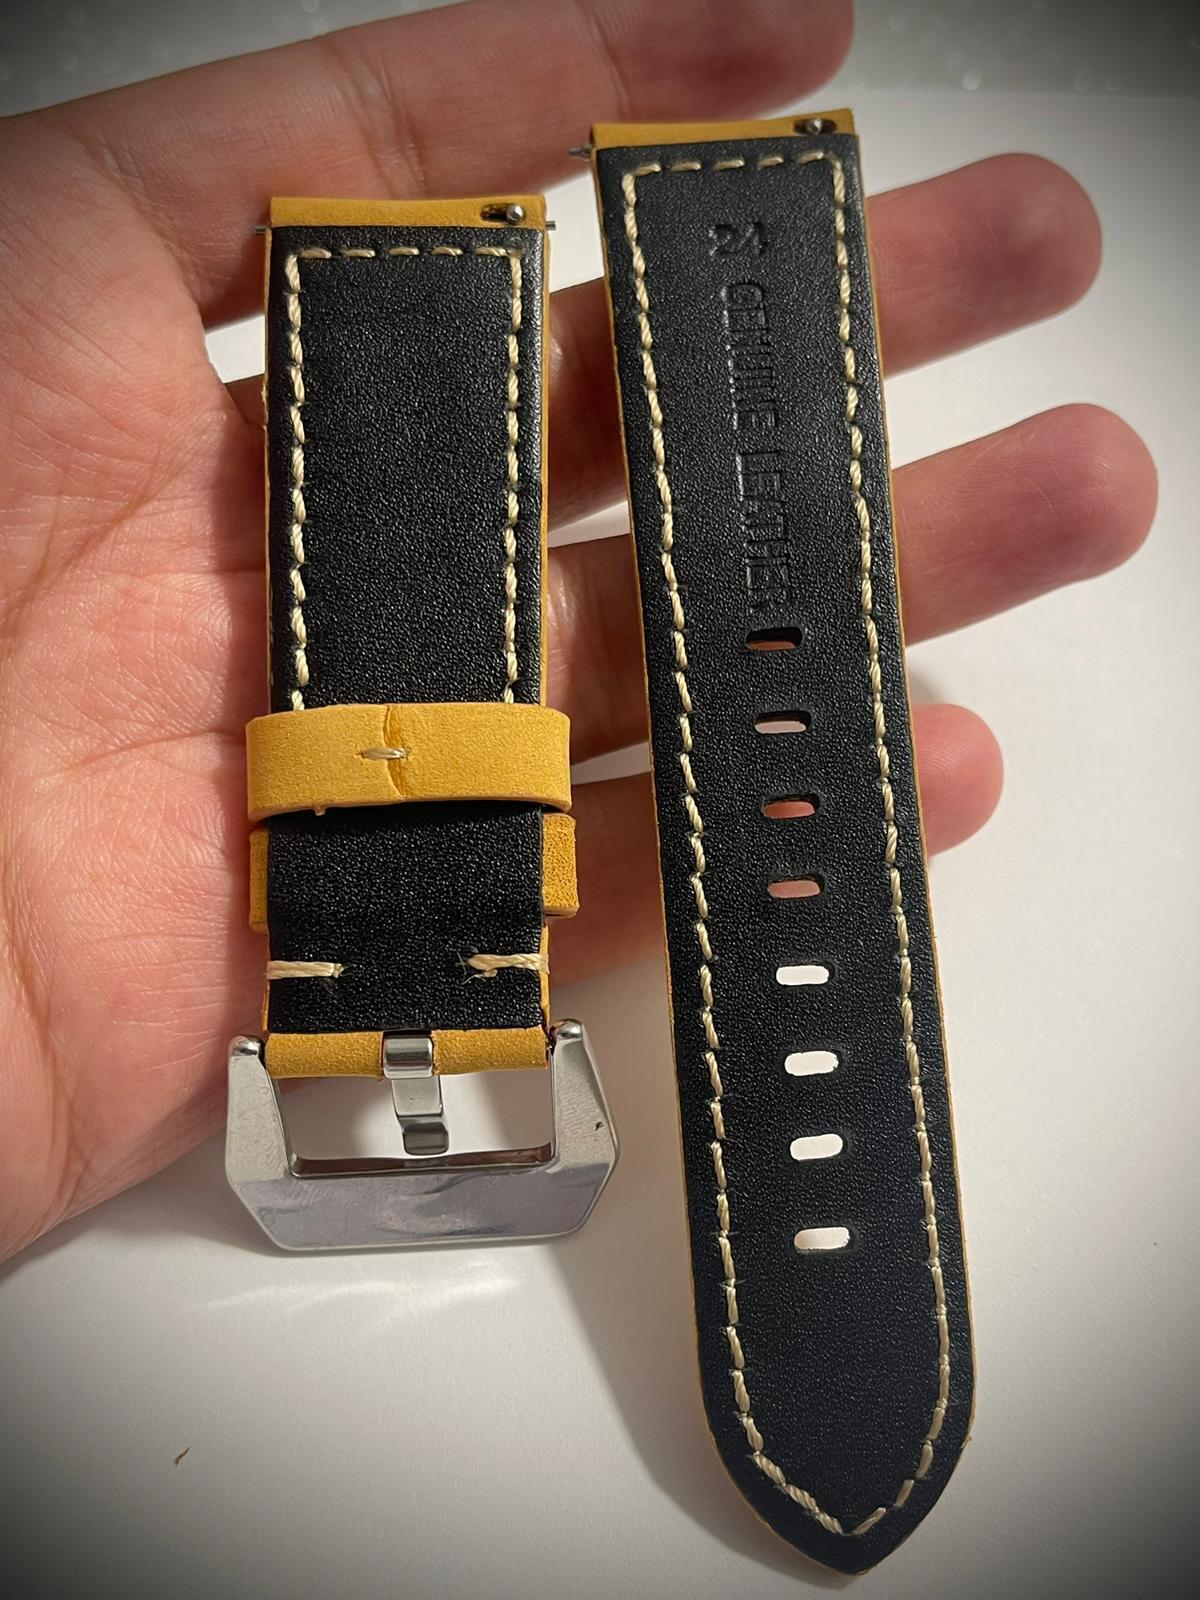 Thick Valvet 18mm 20mm 22mm 24mm Leather Watch Strap Band, New Mustard Yellow